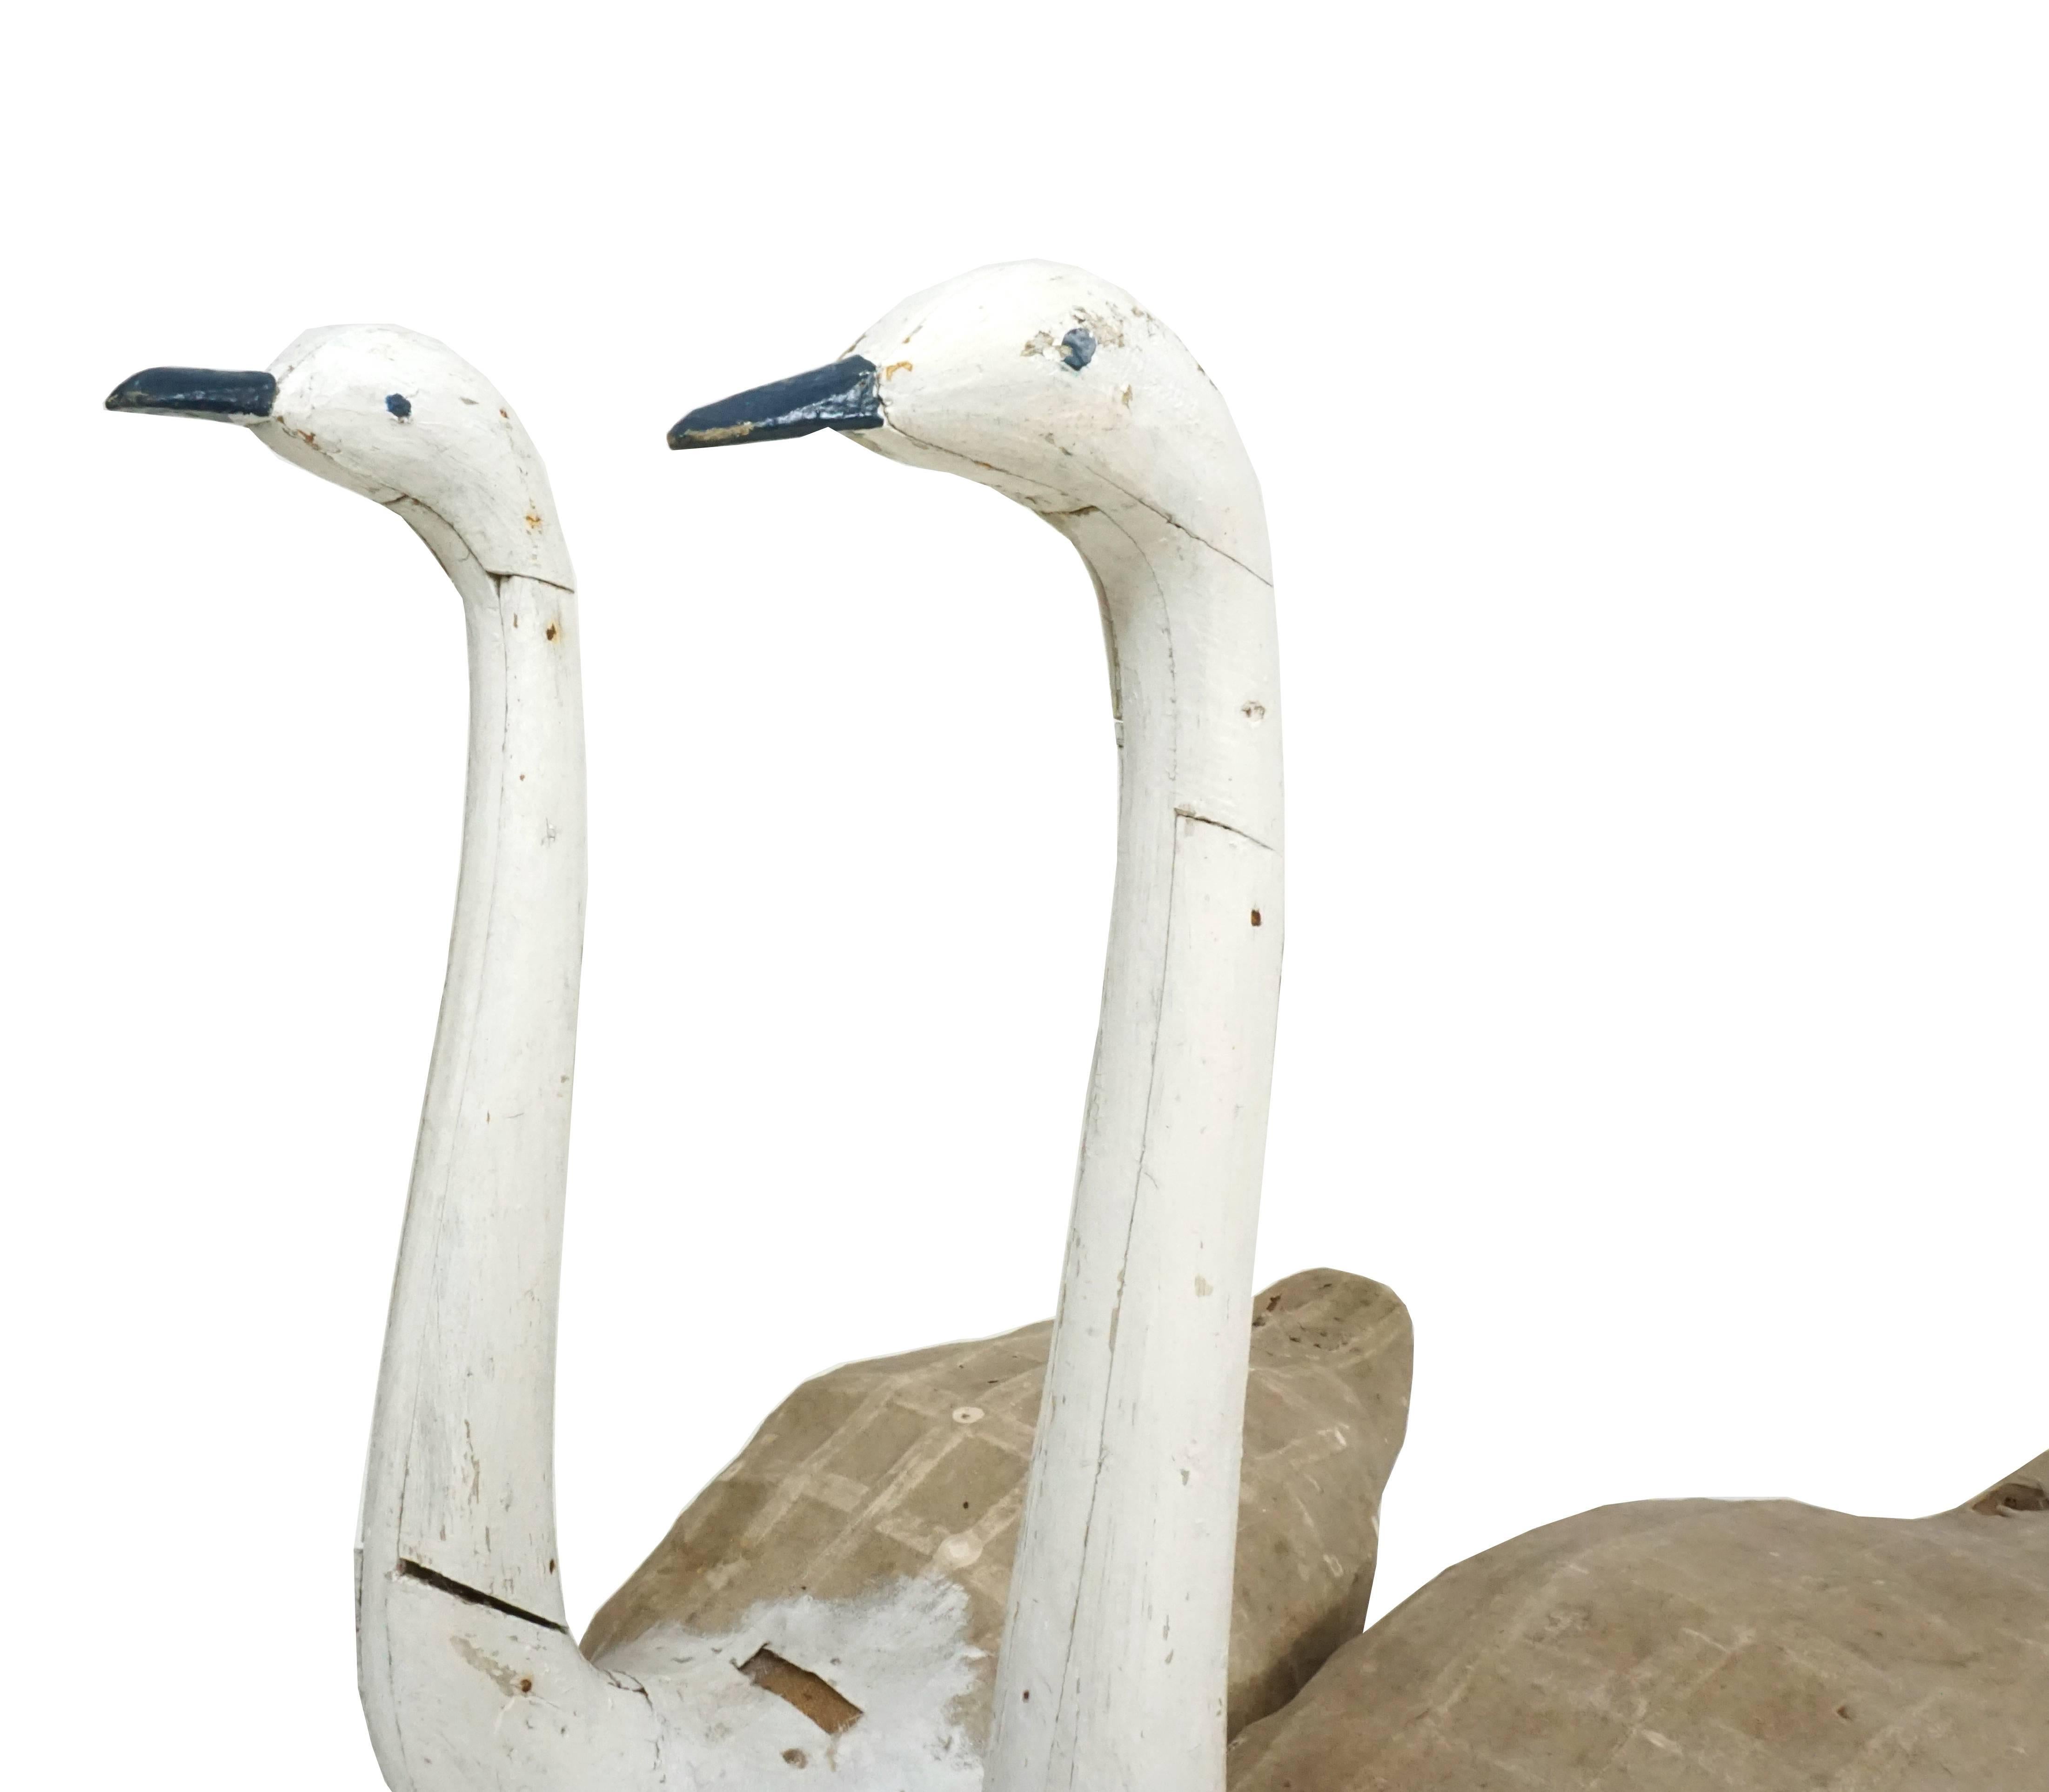 A very rare pair of swan decoys made by one of Denmark best decoy makers Niels Poulsker, circa 1900, Northwest Jutland, Denmark. The pair was used and shows signs of use and hits.